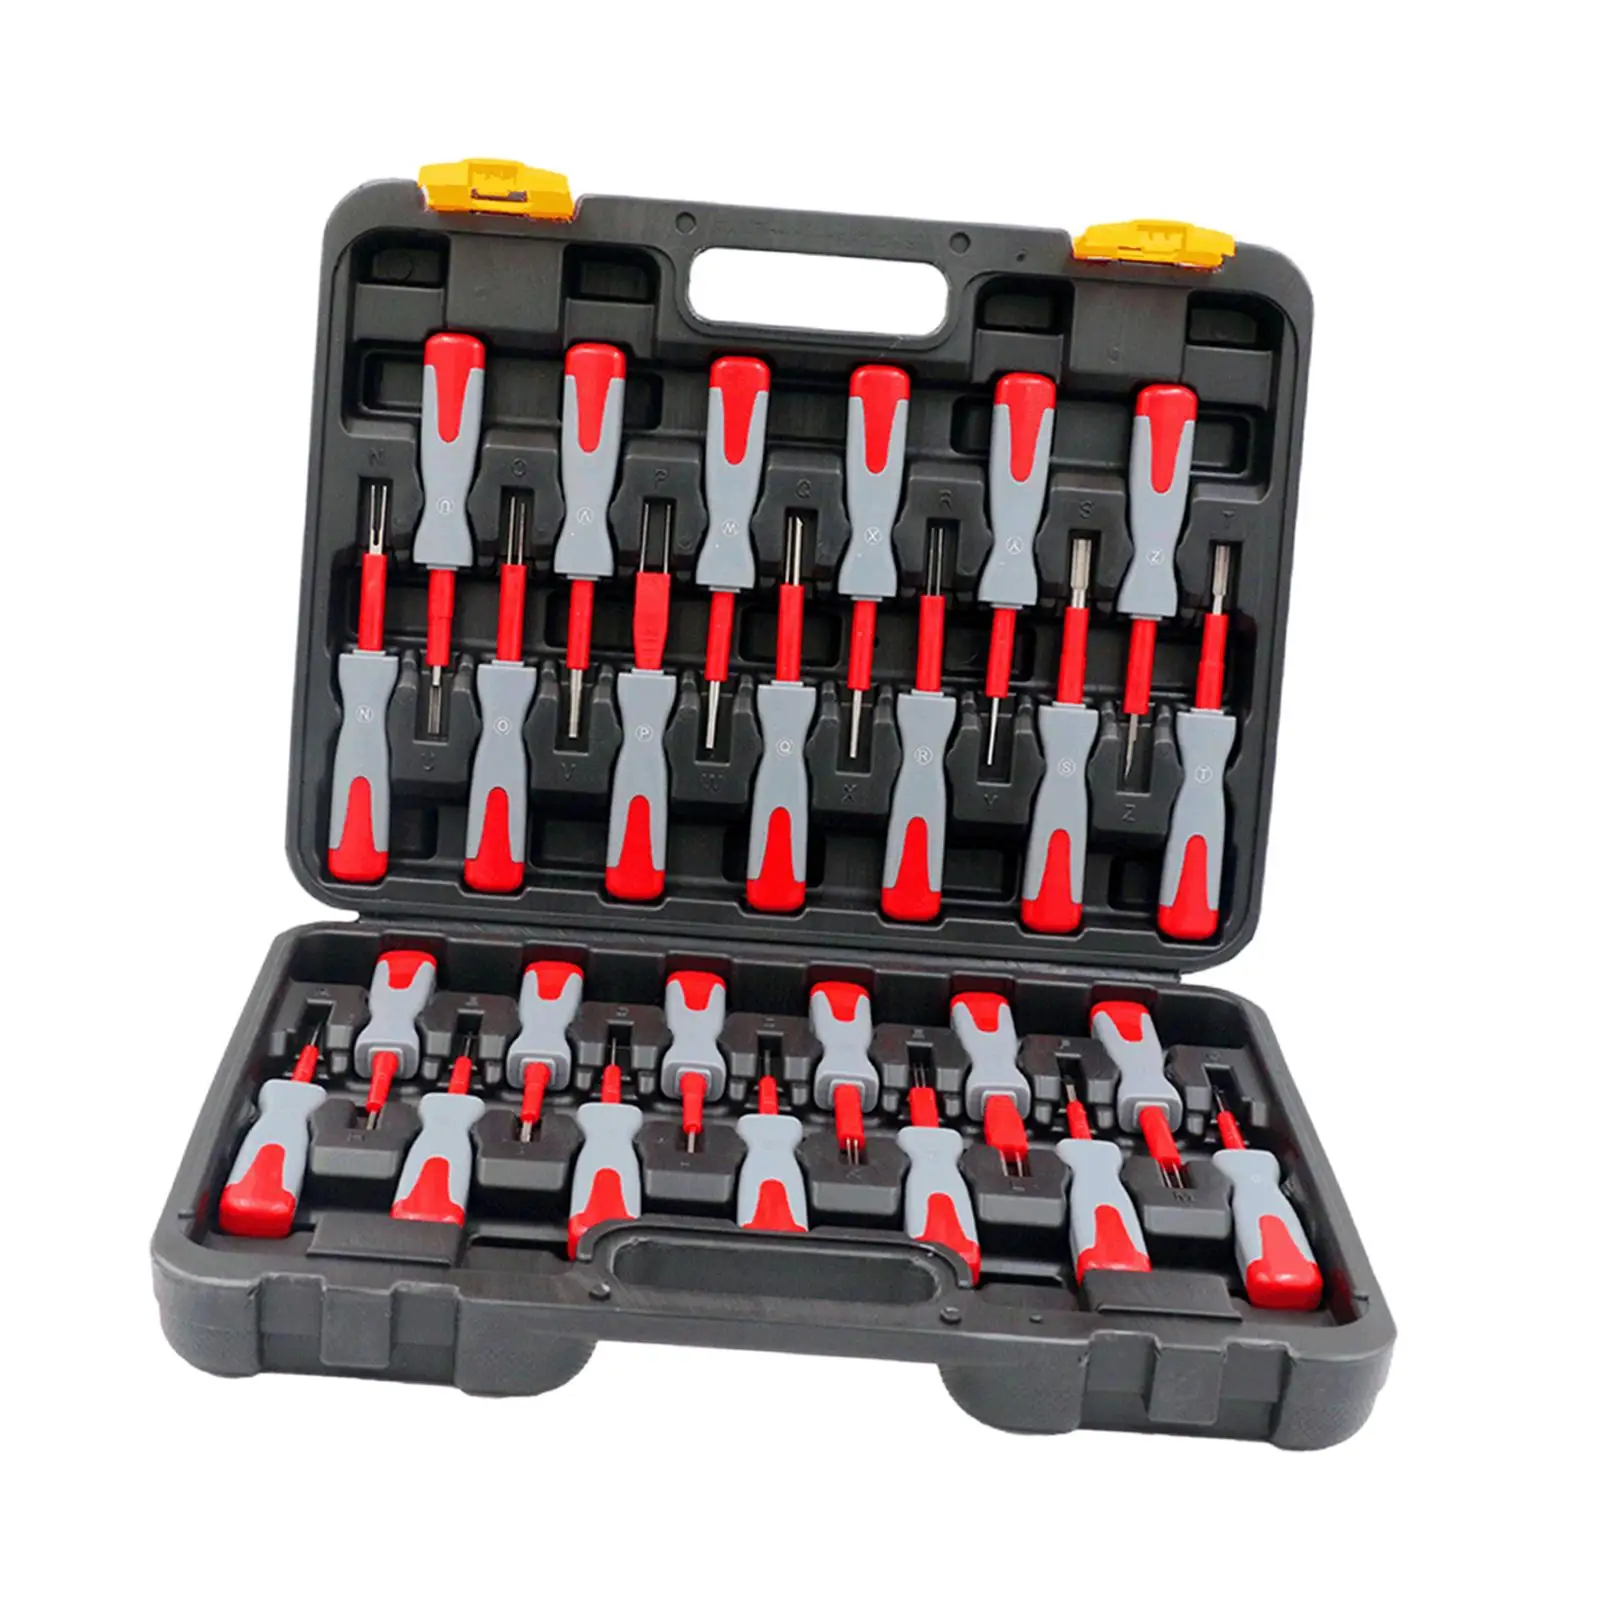 26 Pieces Car Terminal Removal Tool Kit Universal Car Repair Repair Removal Key Tool Wires Pin Ejector Electrical Removal Tools